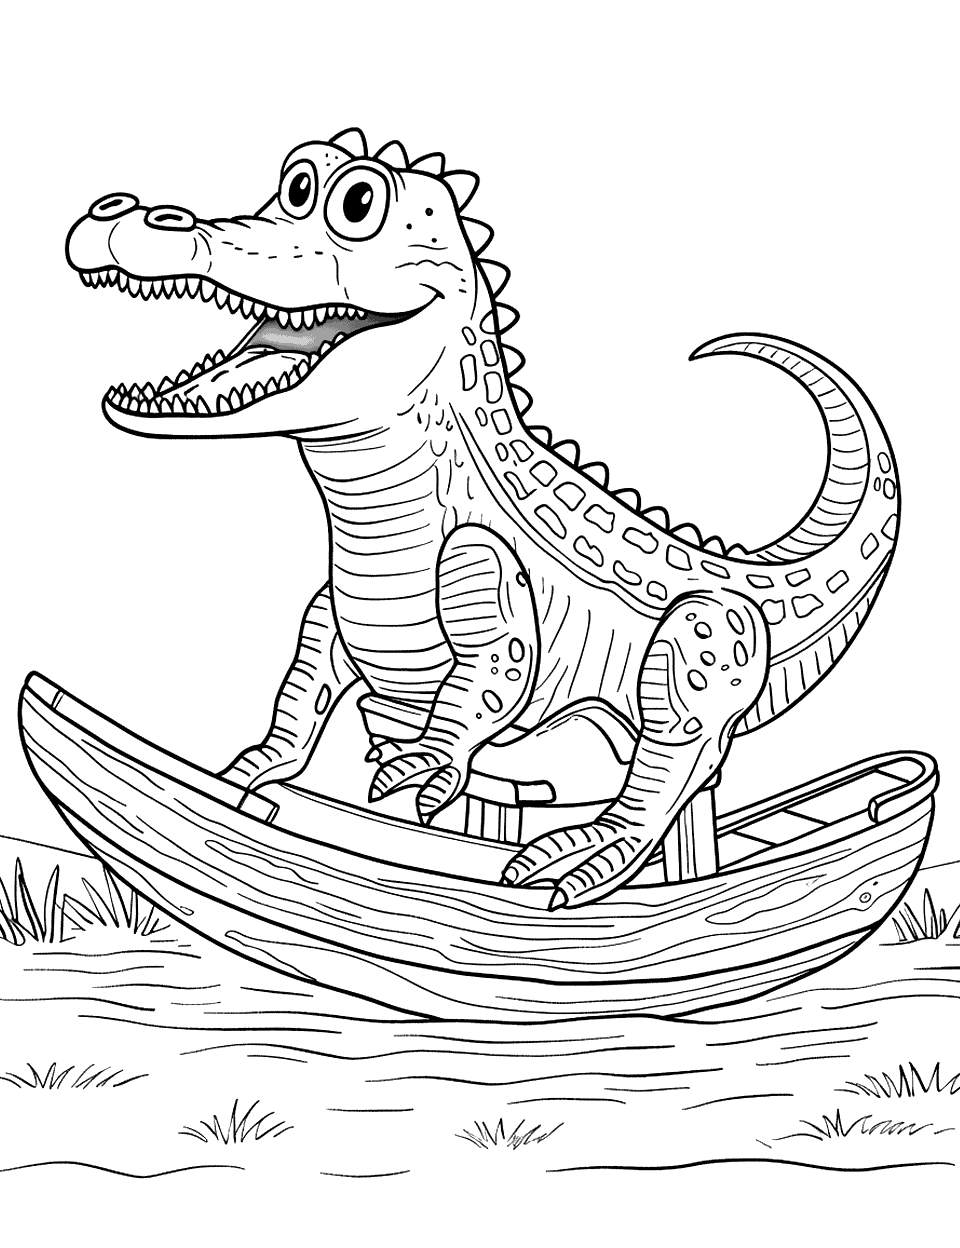 Crocodile on a Boat Coloring Page - A playful crocodile rocking on a wooden boat with a big smile.